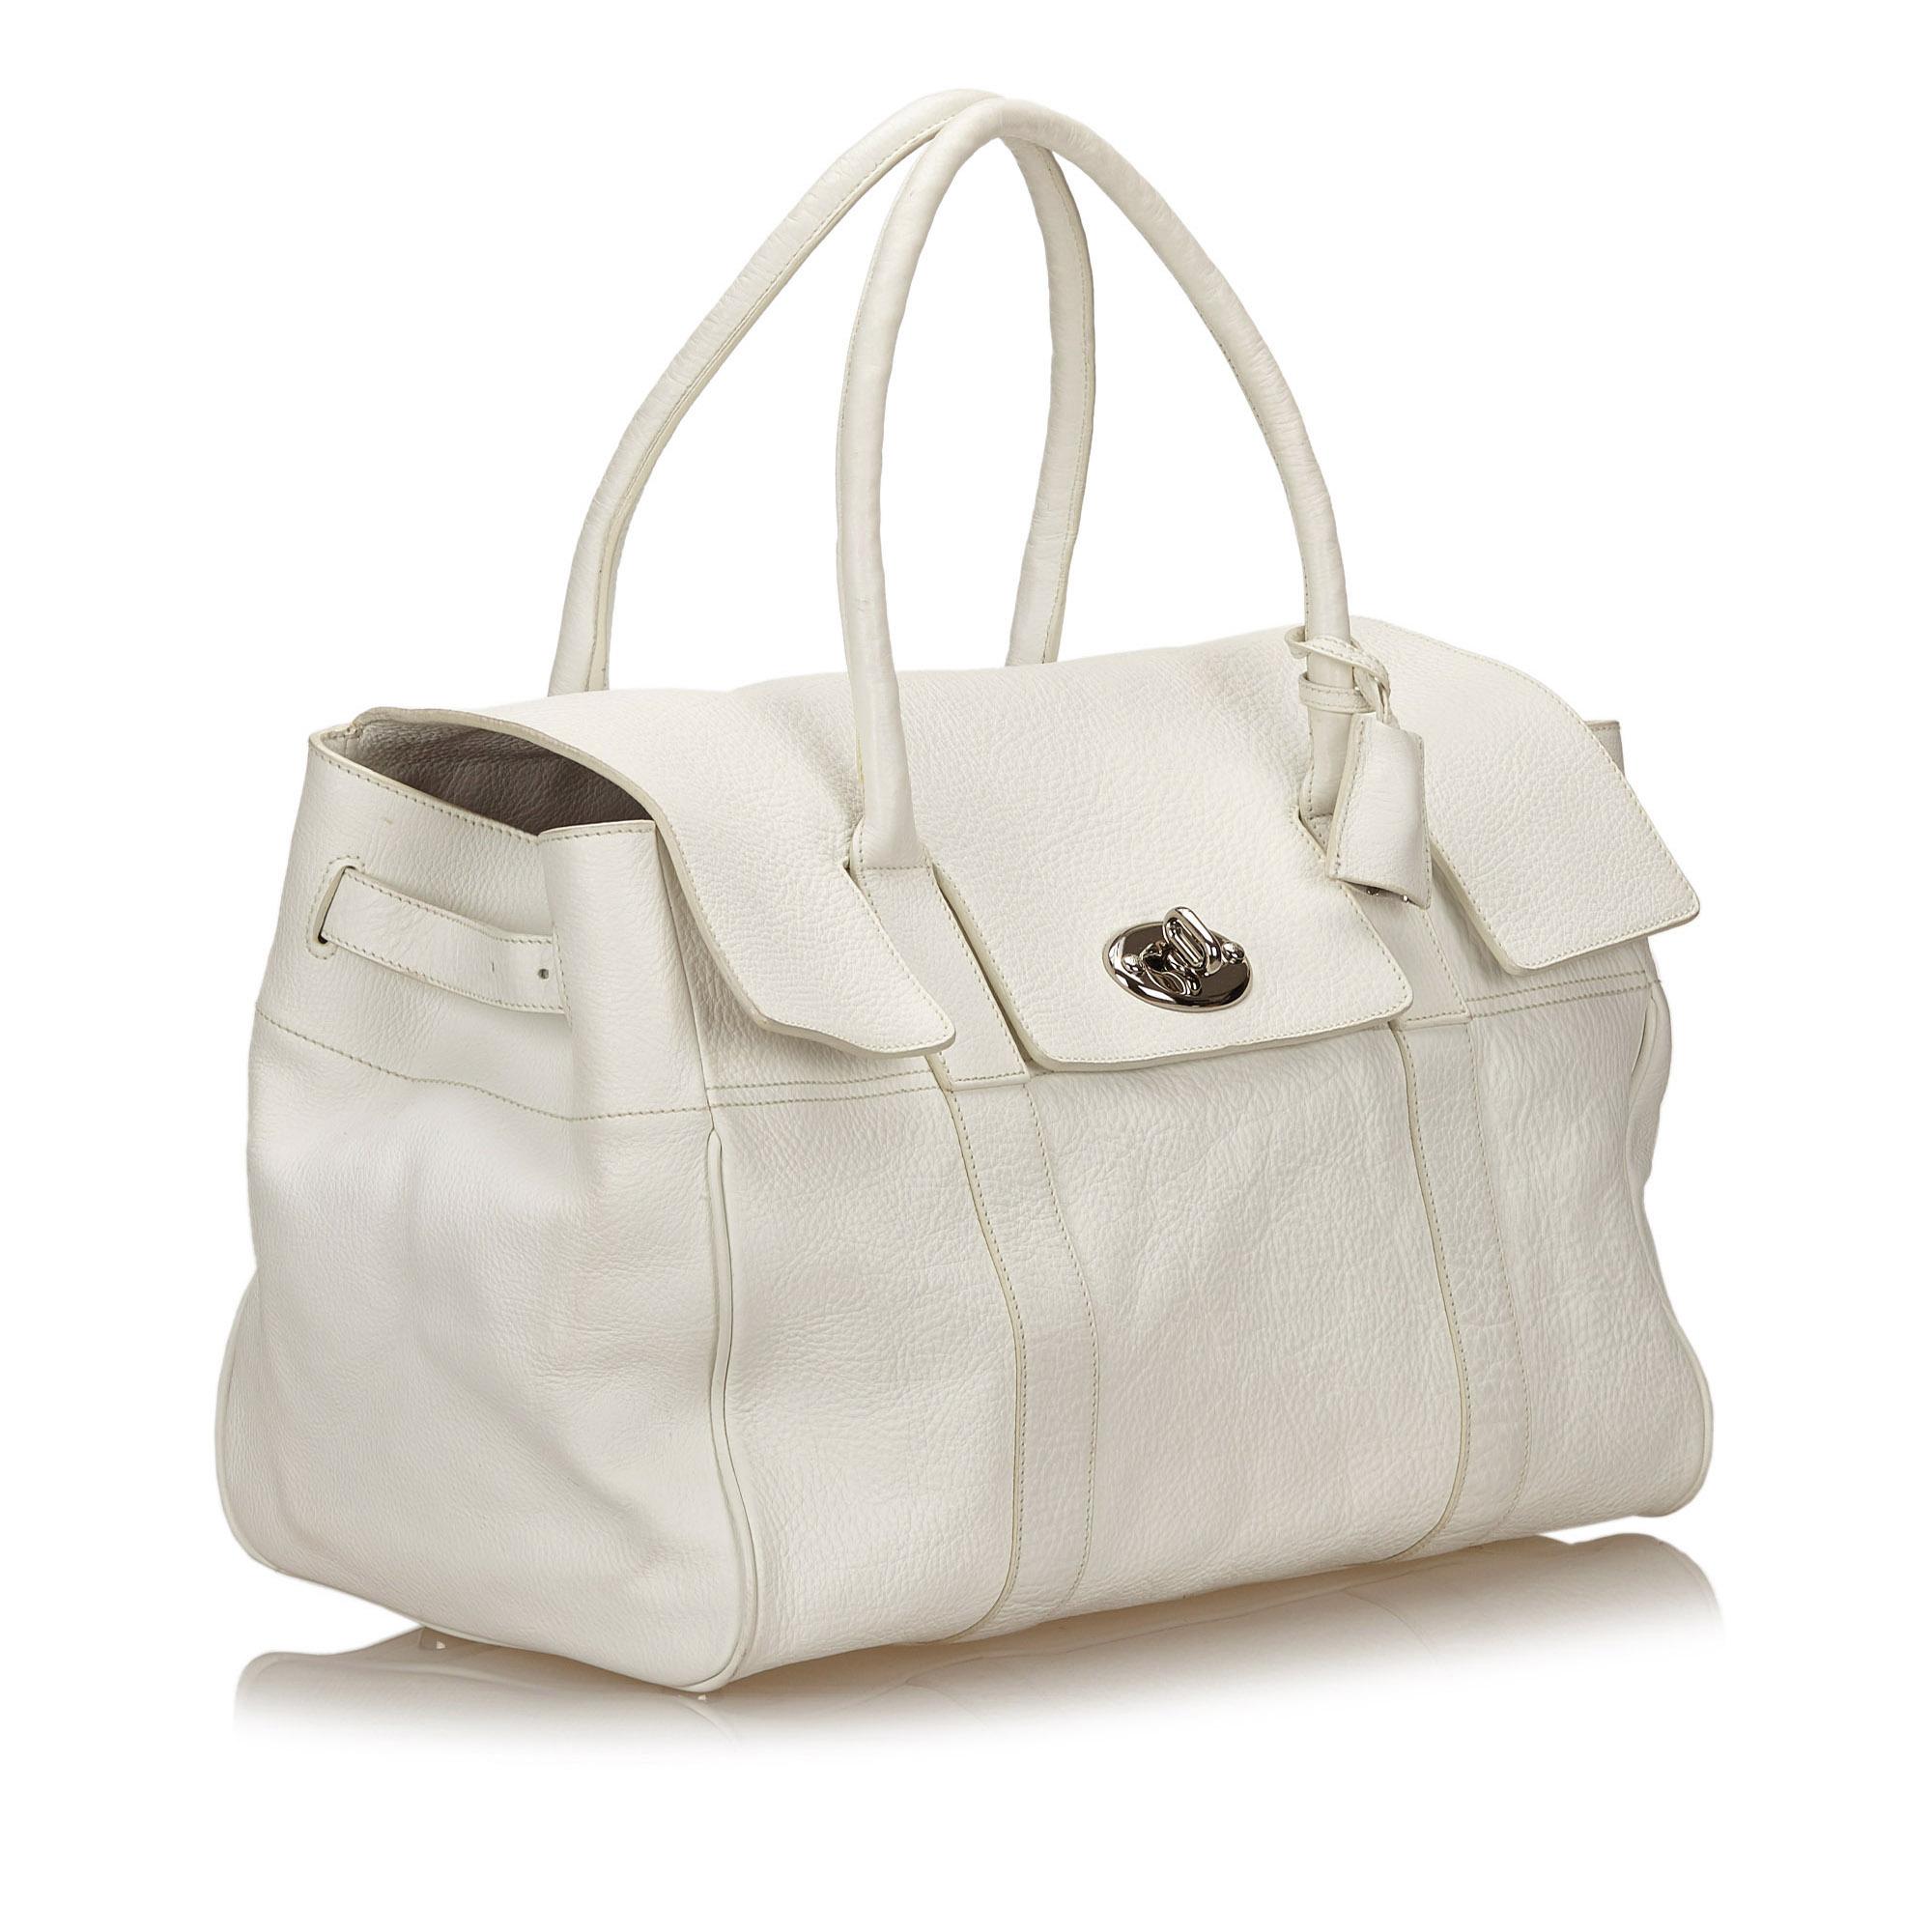 The Bayswater features a leather body, rolled handles, a front flap with a twist lock closure, adjustable belt details on the sides, metal feet, and an interior zip pocket. It carries as B condition rating.

Inclusions: 
Dust